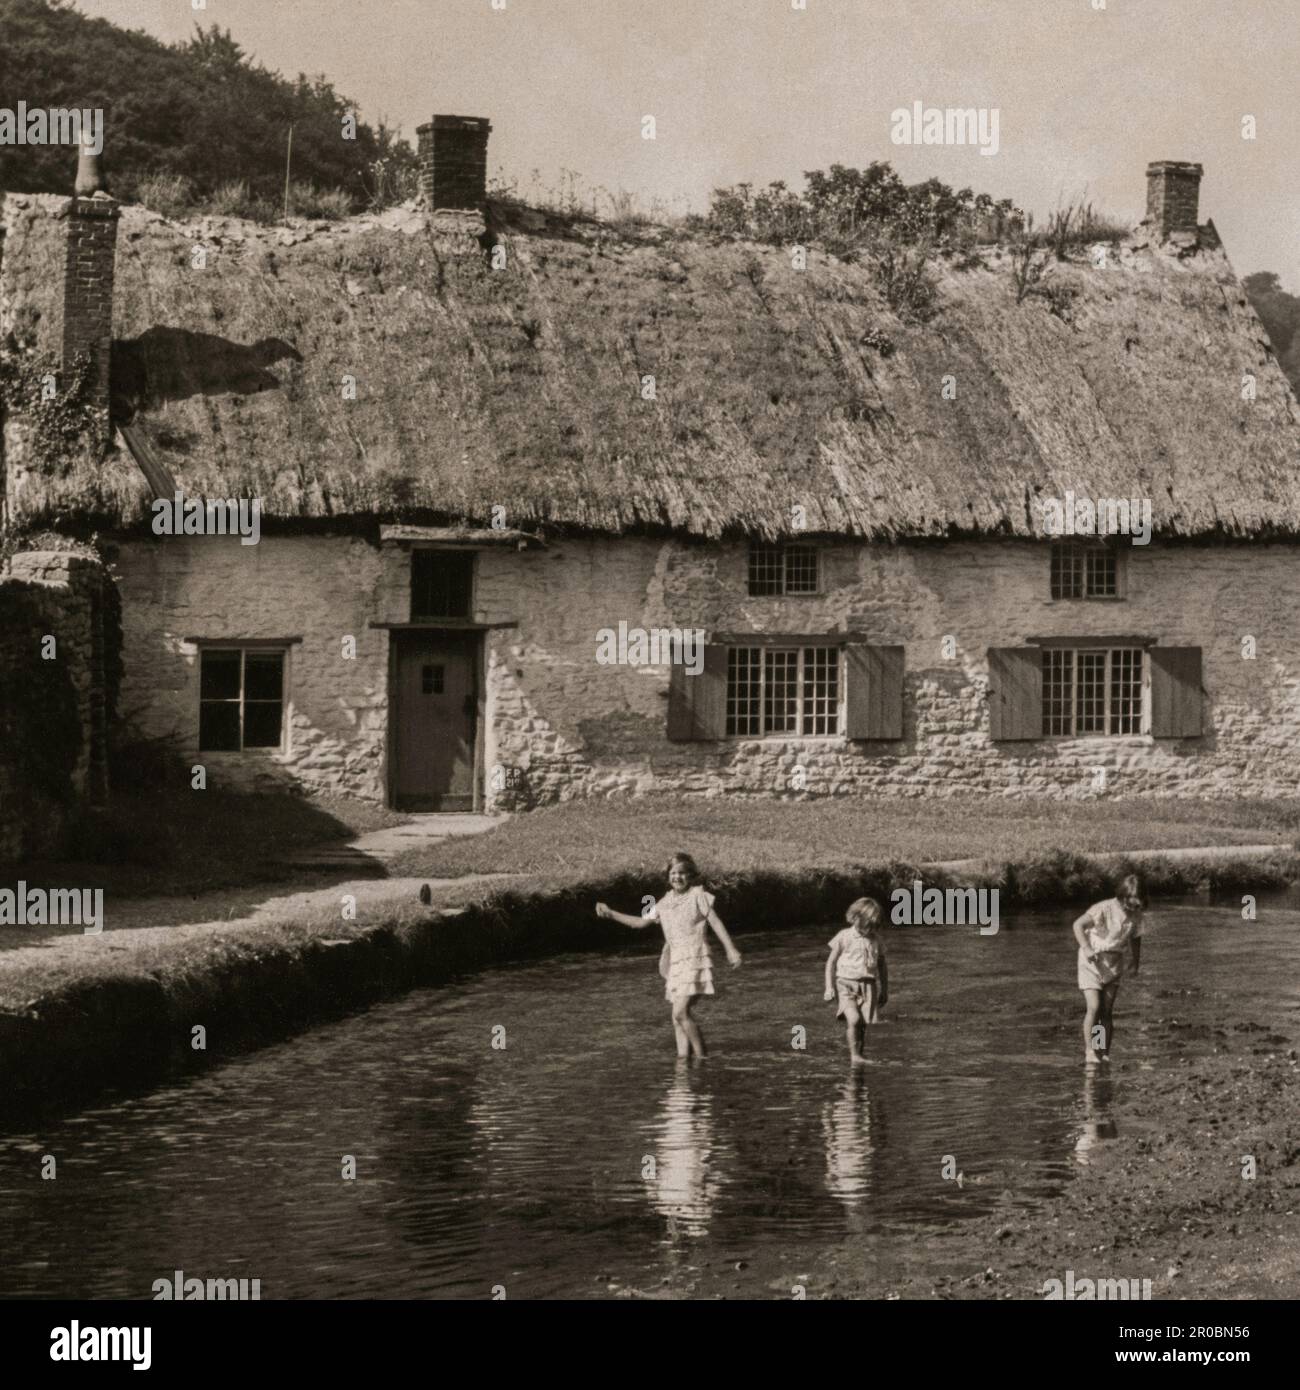 Photograph taken in the 1930s of Beck Isle Cottage, also known as The Thatched Cottage, in Thornton-le-Dale, Yorkshire, England.  The cottage was built in the 1600s of cruck construction. In this image, the thatch is rotten and the roof in need of re-thatching. Bushes and grass appear to be growing out of the roof ridge. Stock Photo